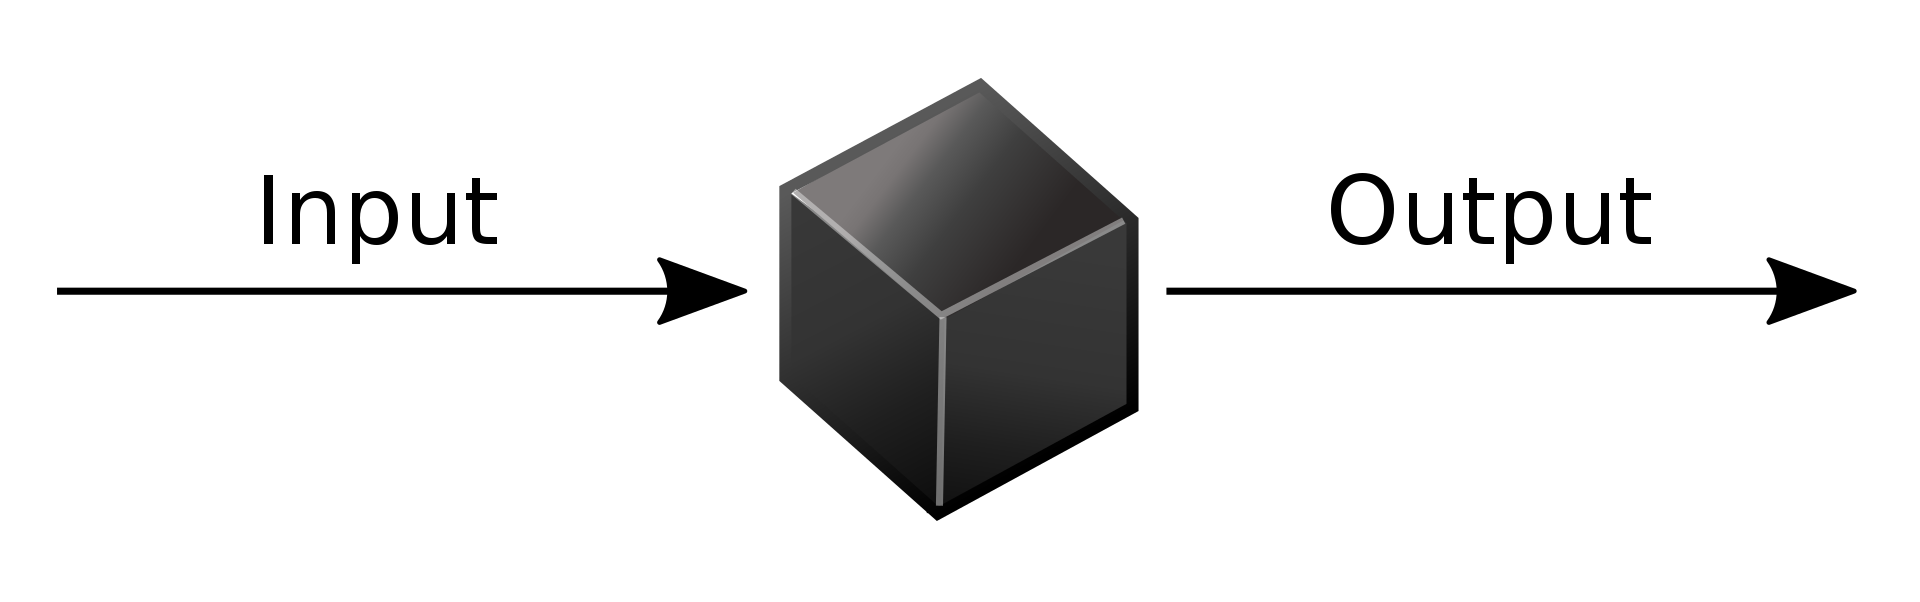 Black box test image from wikipedia